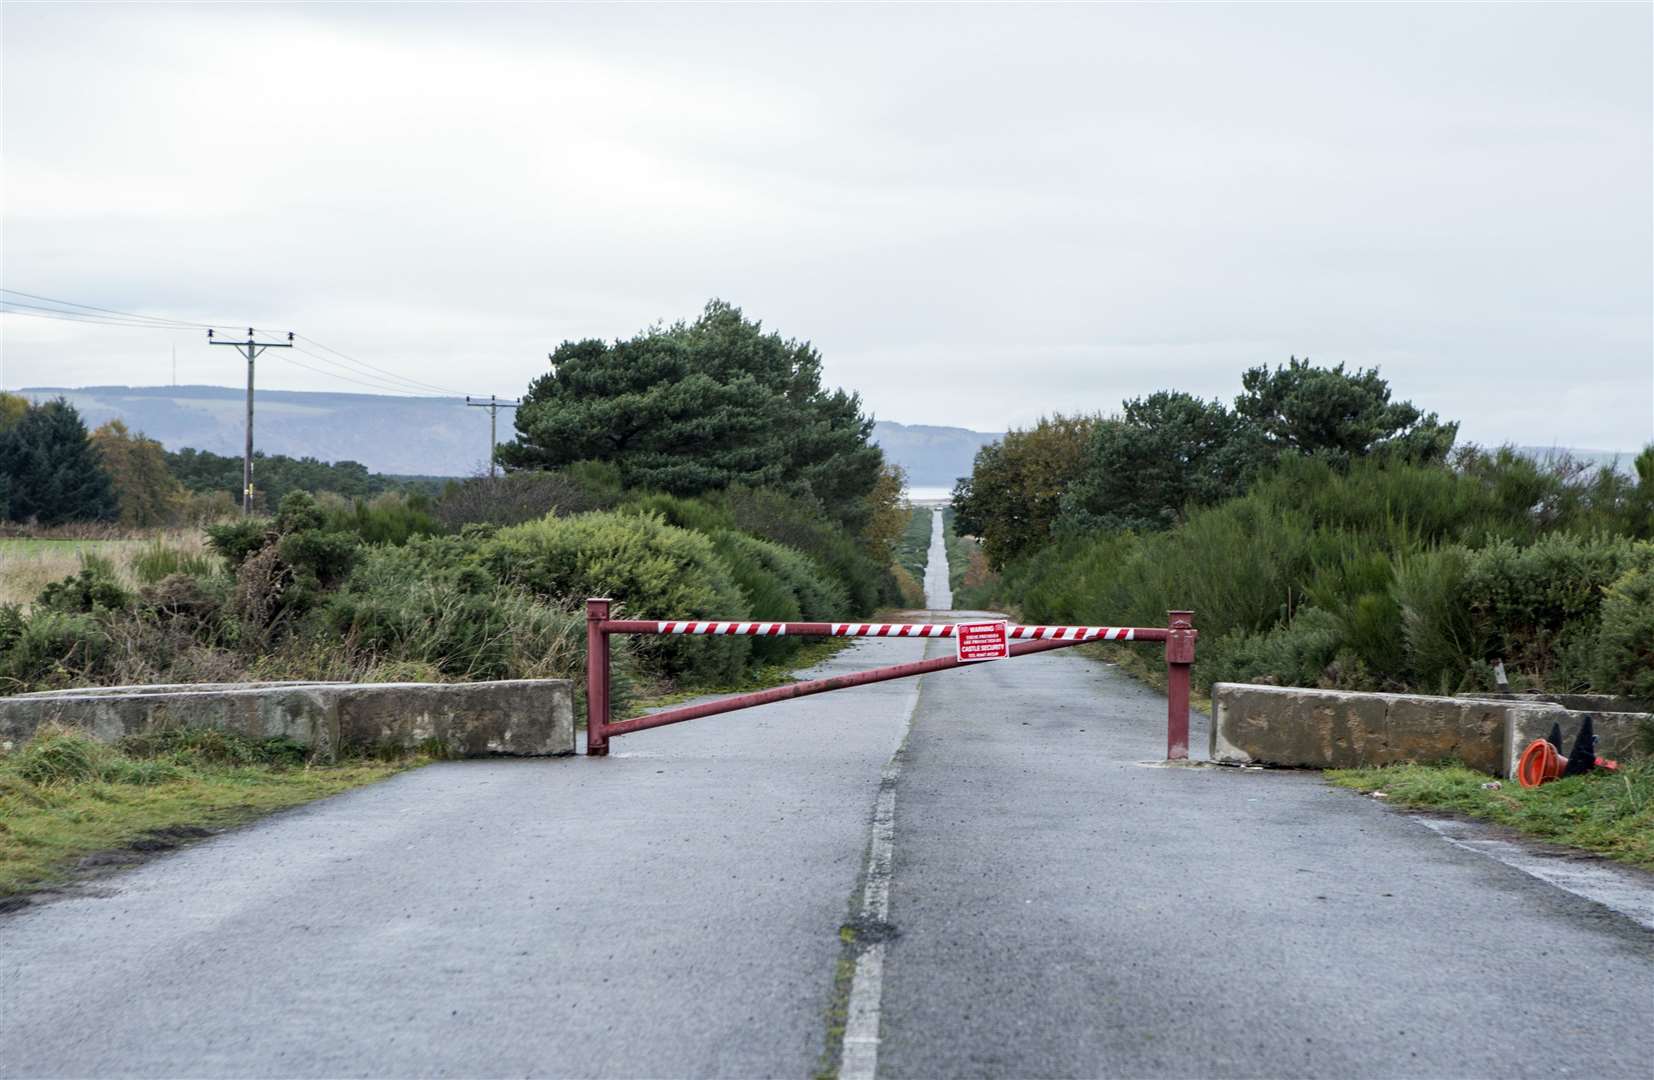 The road to the Port of Ardersier could soon be busy again if BW Ideol's fabrication plans go ahead. Picture John Baikie.